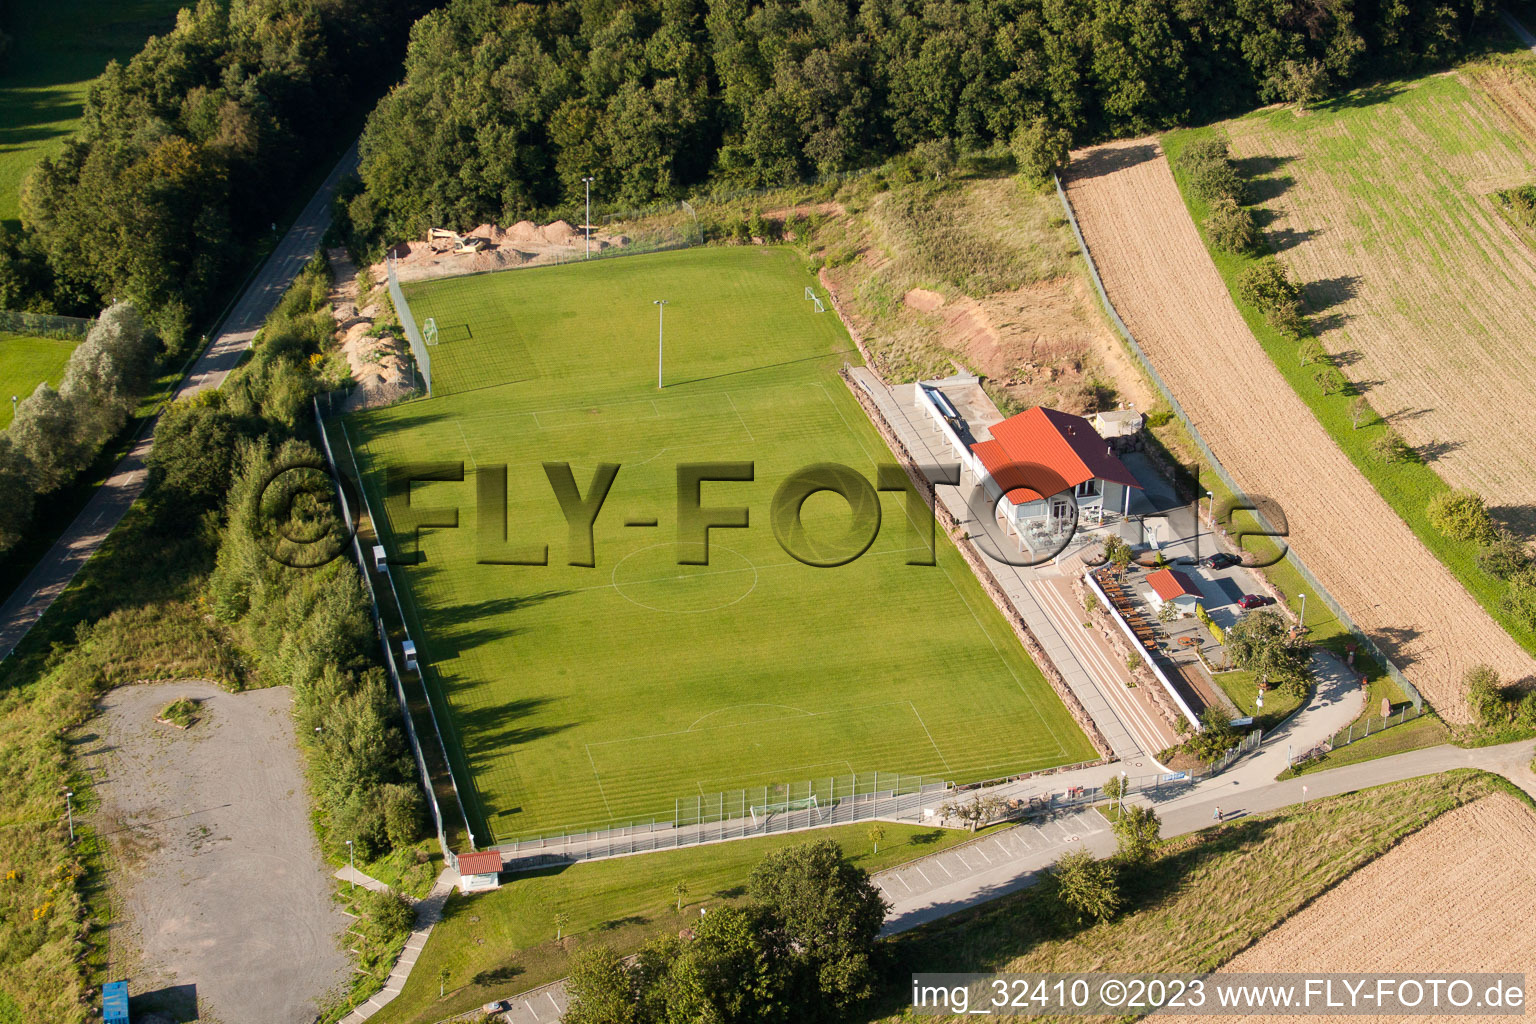 Pneuhage Stadium in the district Auerbach in Karlsbad in the state Baden-Wuerttemberg, Germany viewn from the air